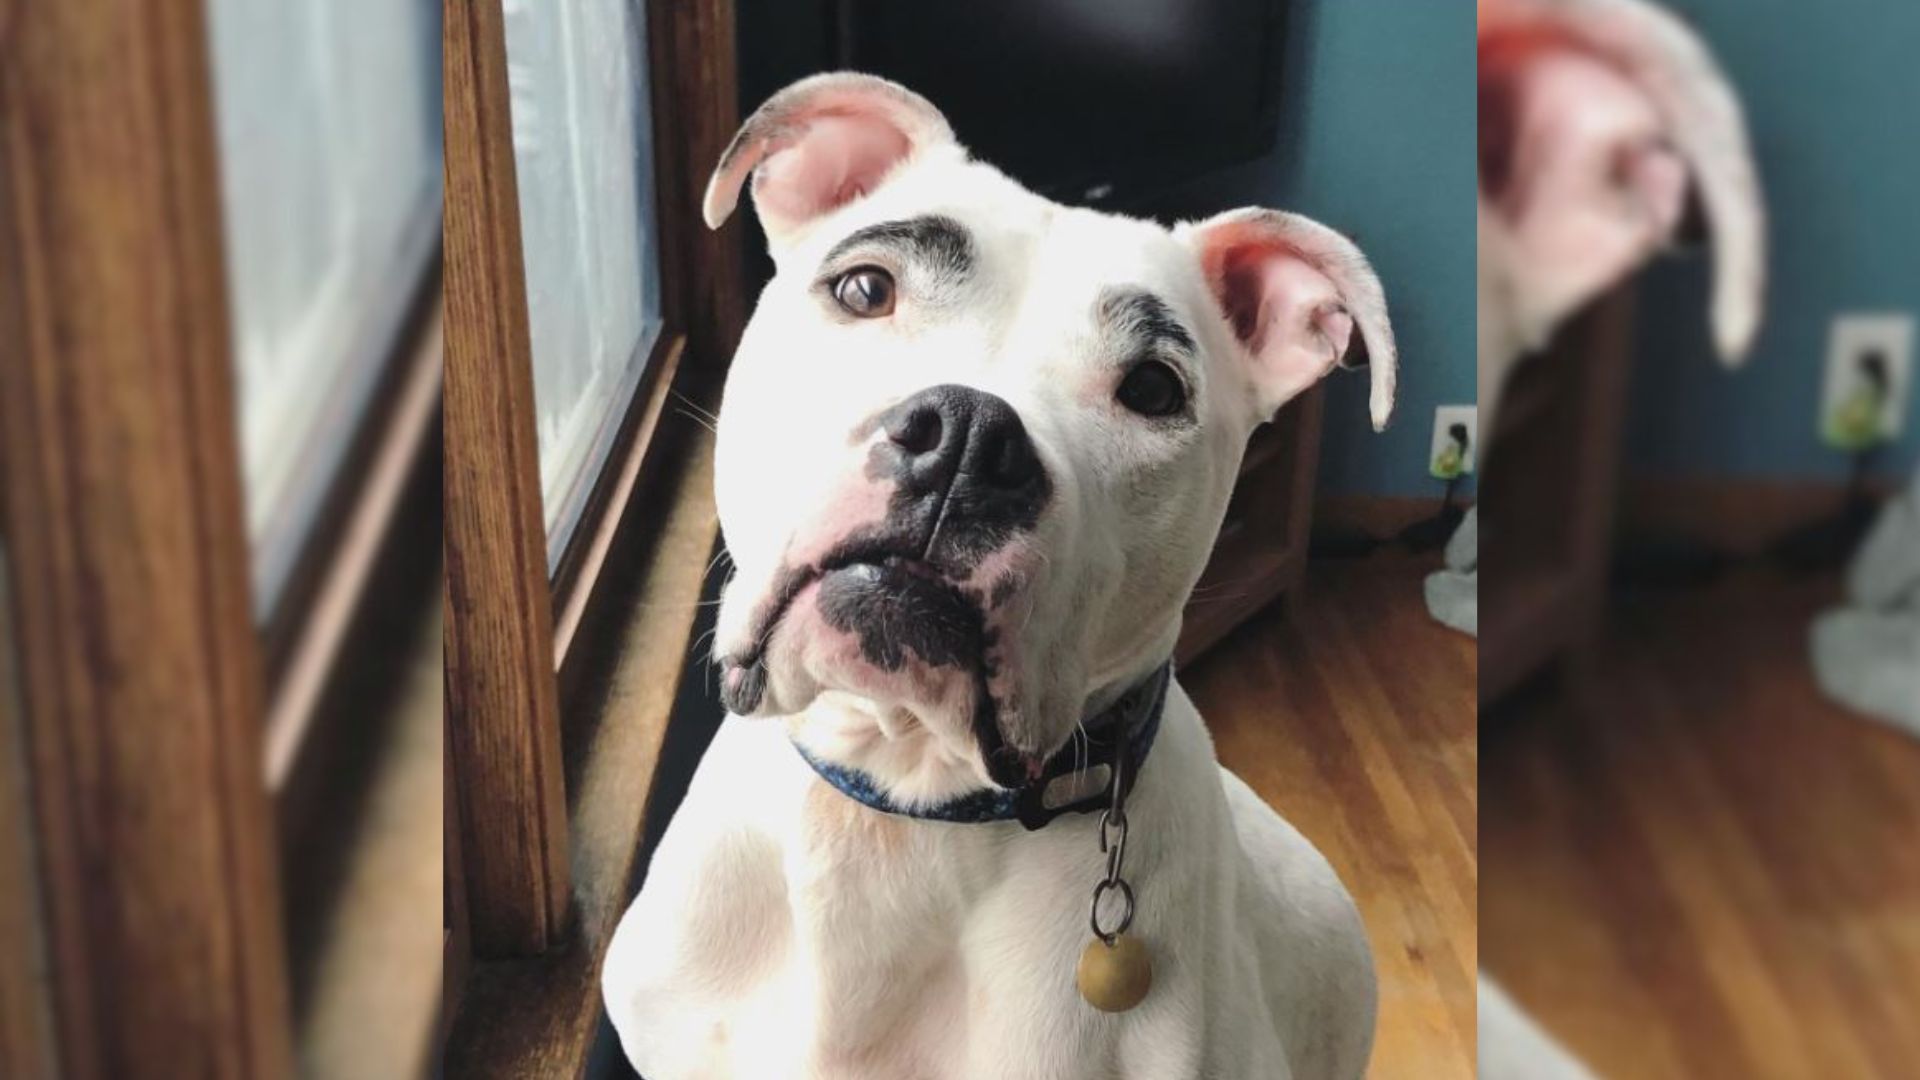 Rescue Pittie With Unique Eyebrows Finds A Forever Home After He Meets Someone Special